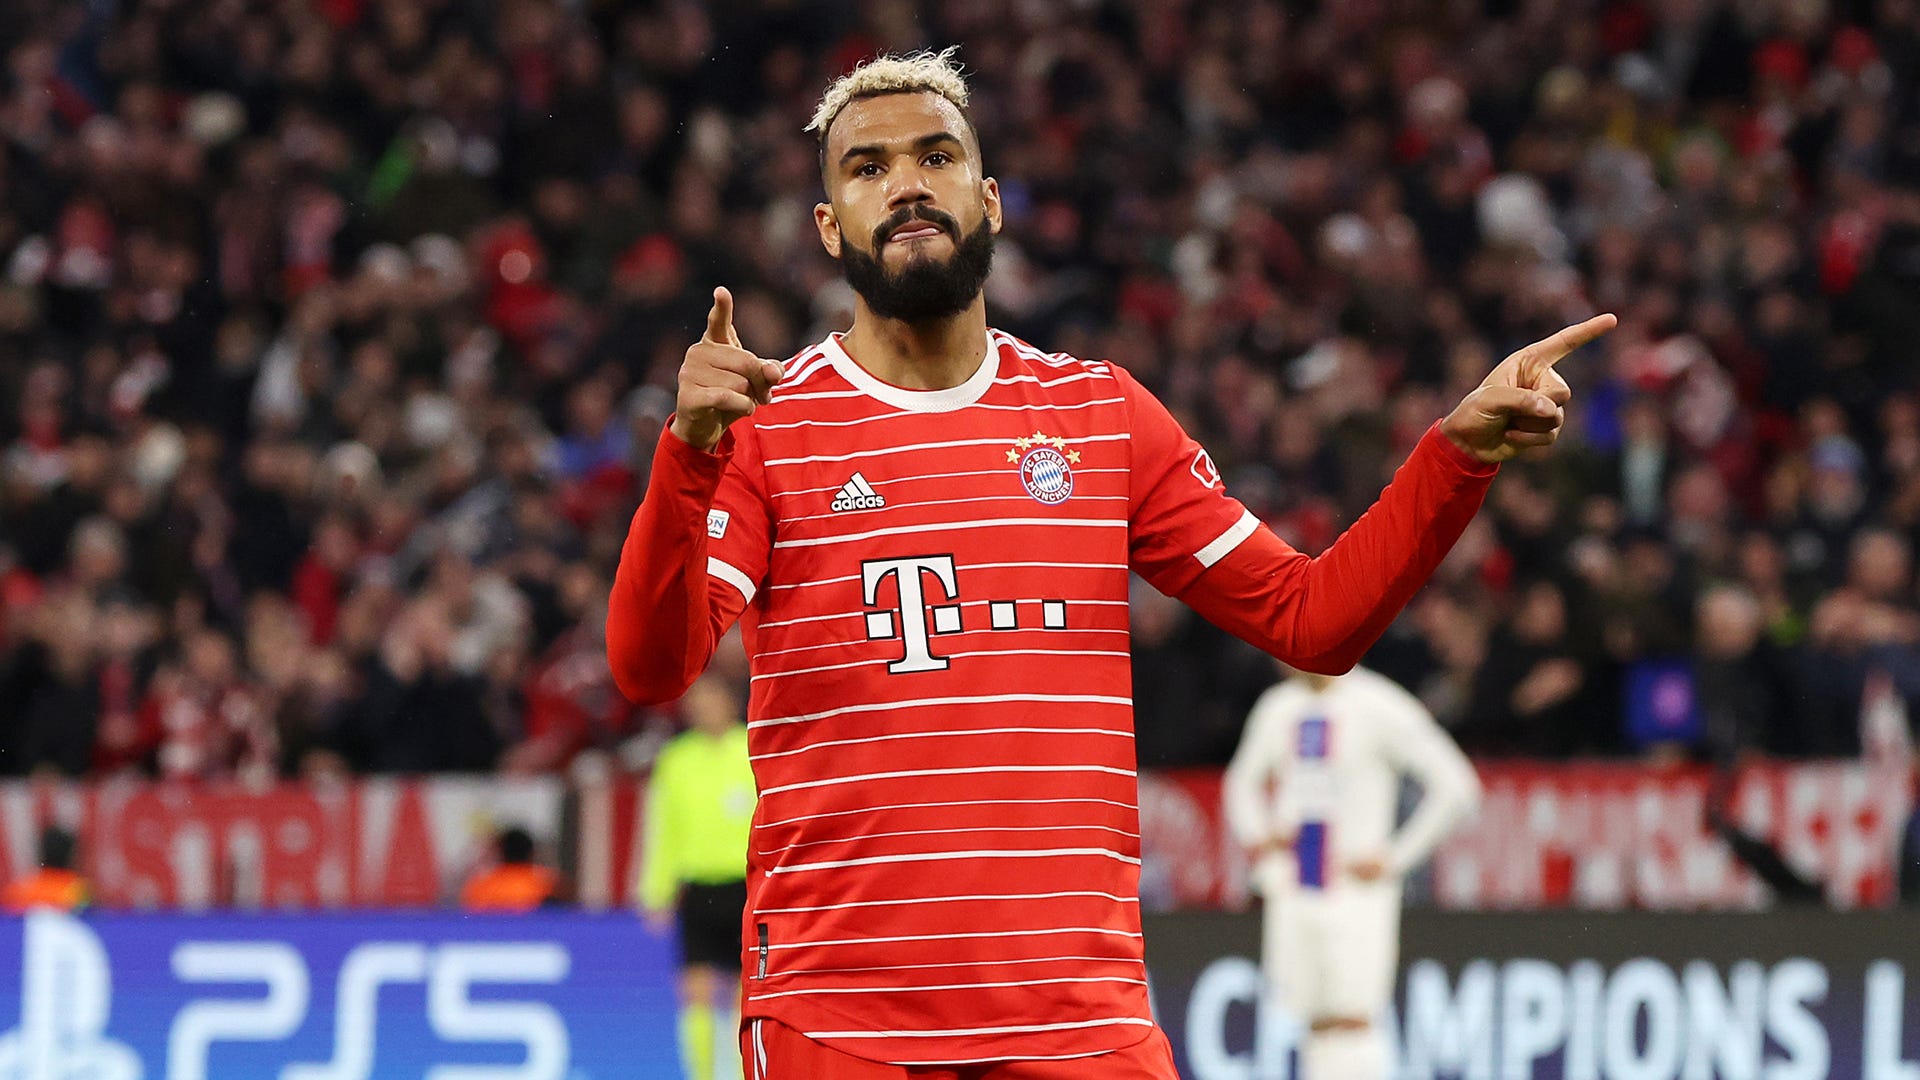 Bayer Leverkusen vs Bayern Munich Live stream, TV channel, kick-off time and where to watch Goal